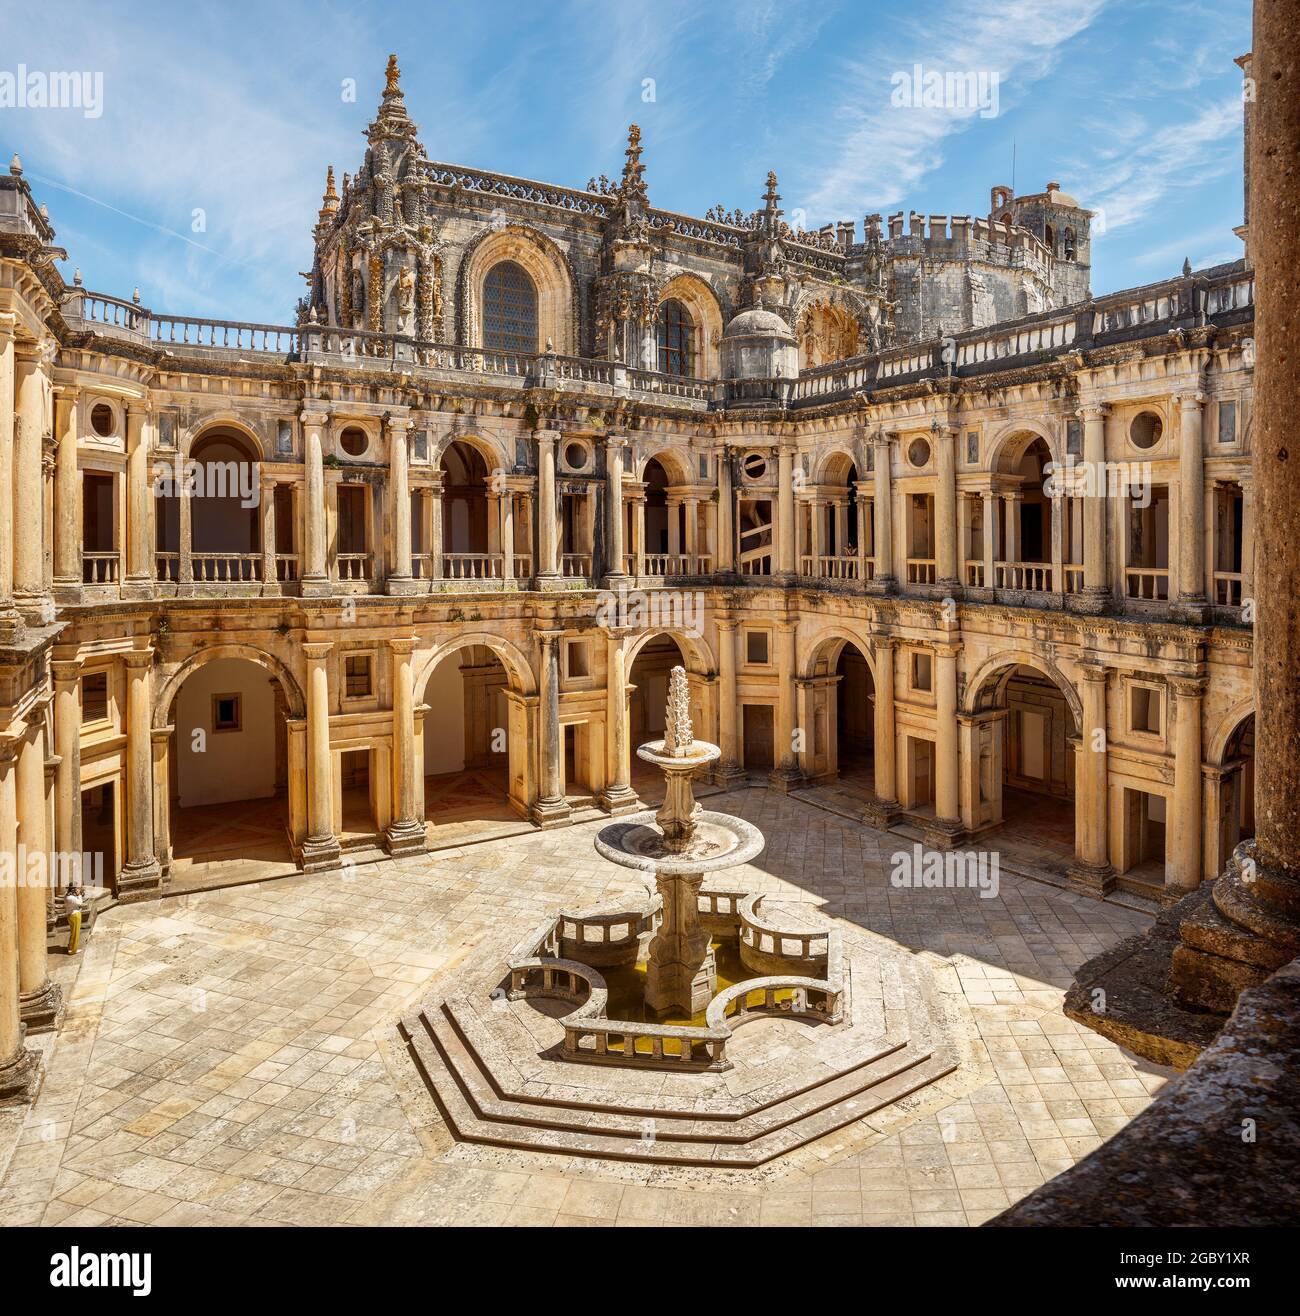 Tomar, Portugal - June 3, 2021: View, from the top floor, of the main cloister of the Convento de Cristo in Tomar, Portugal, on a sunny day. Stock Photo